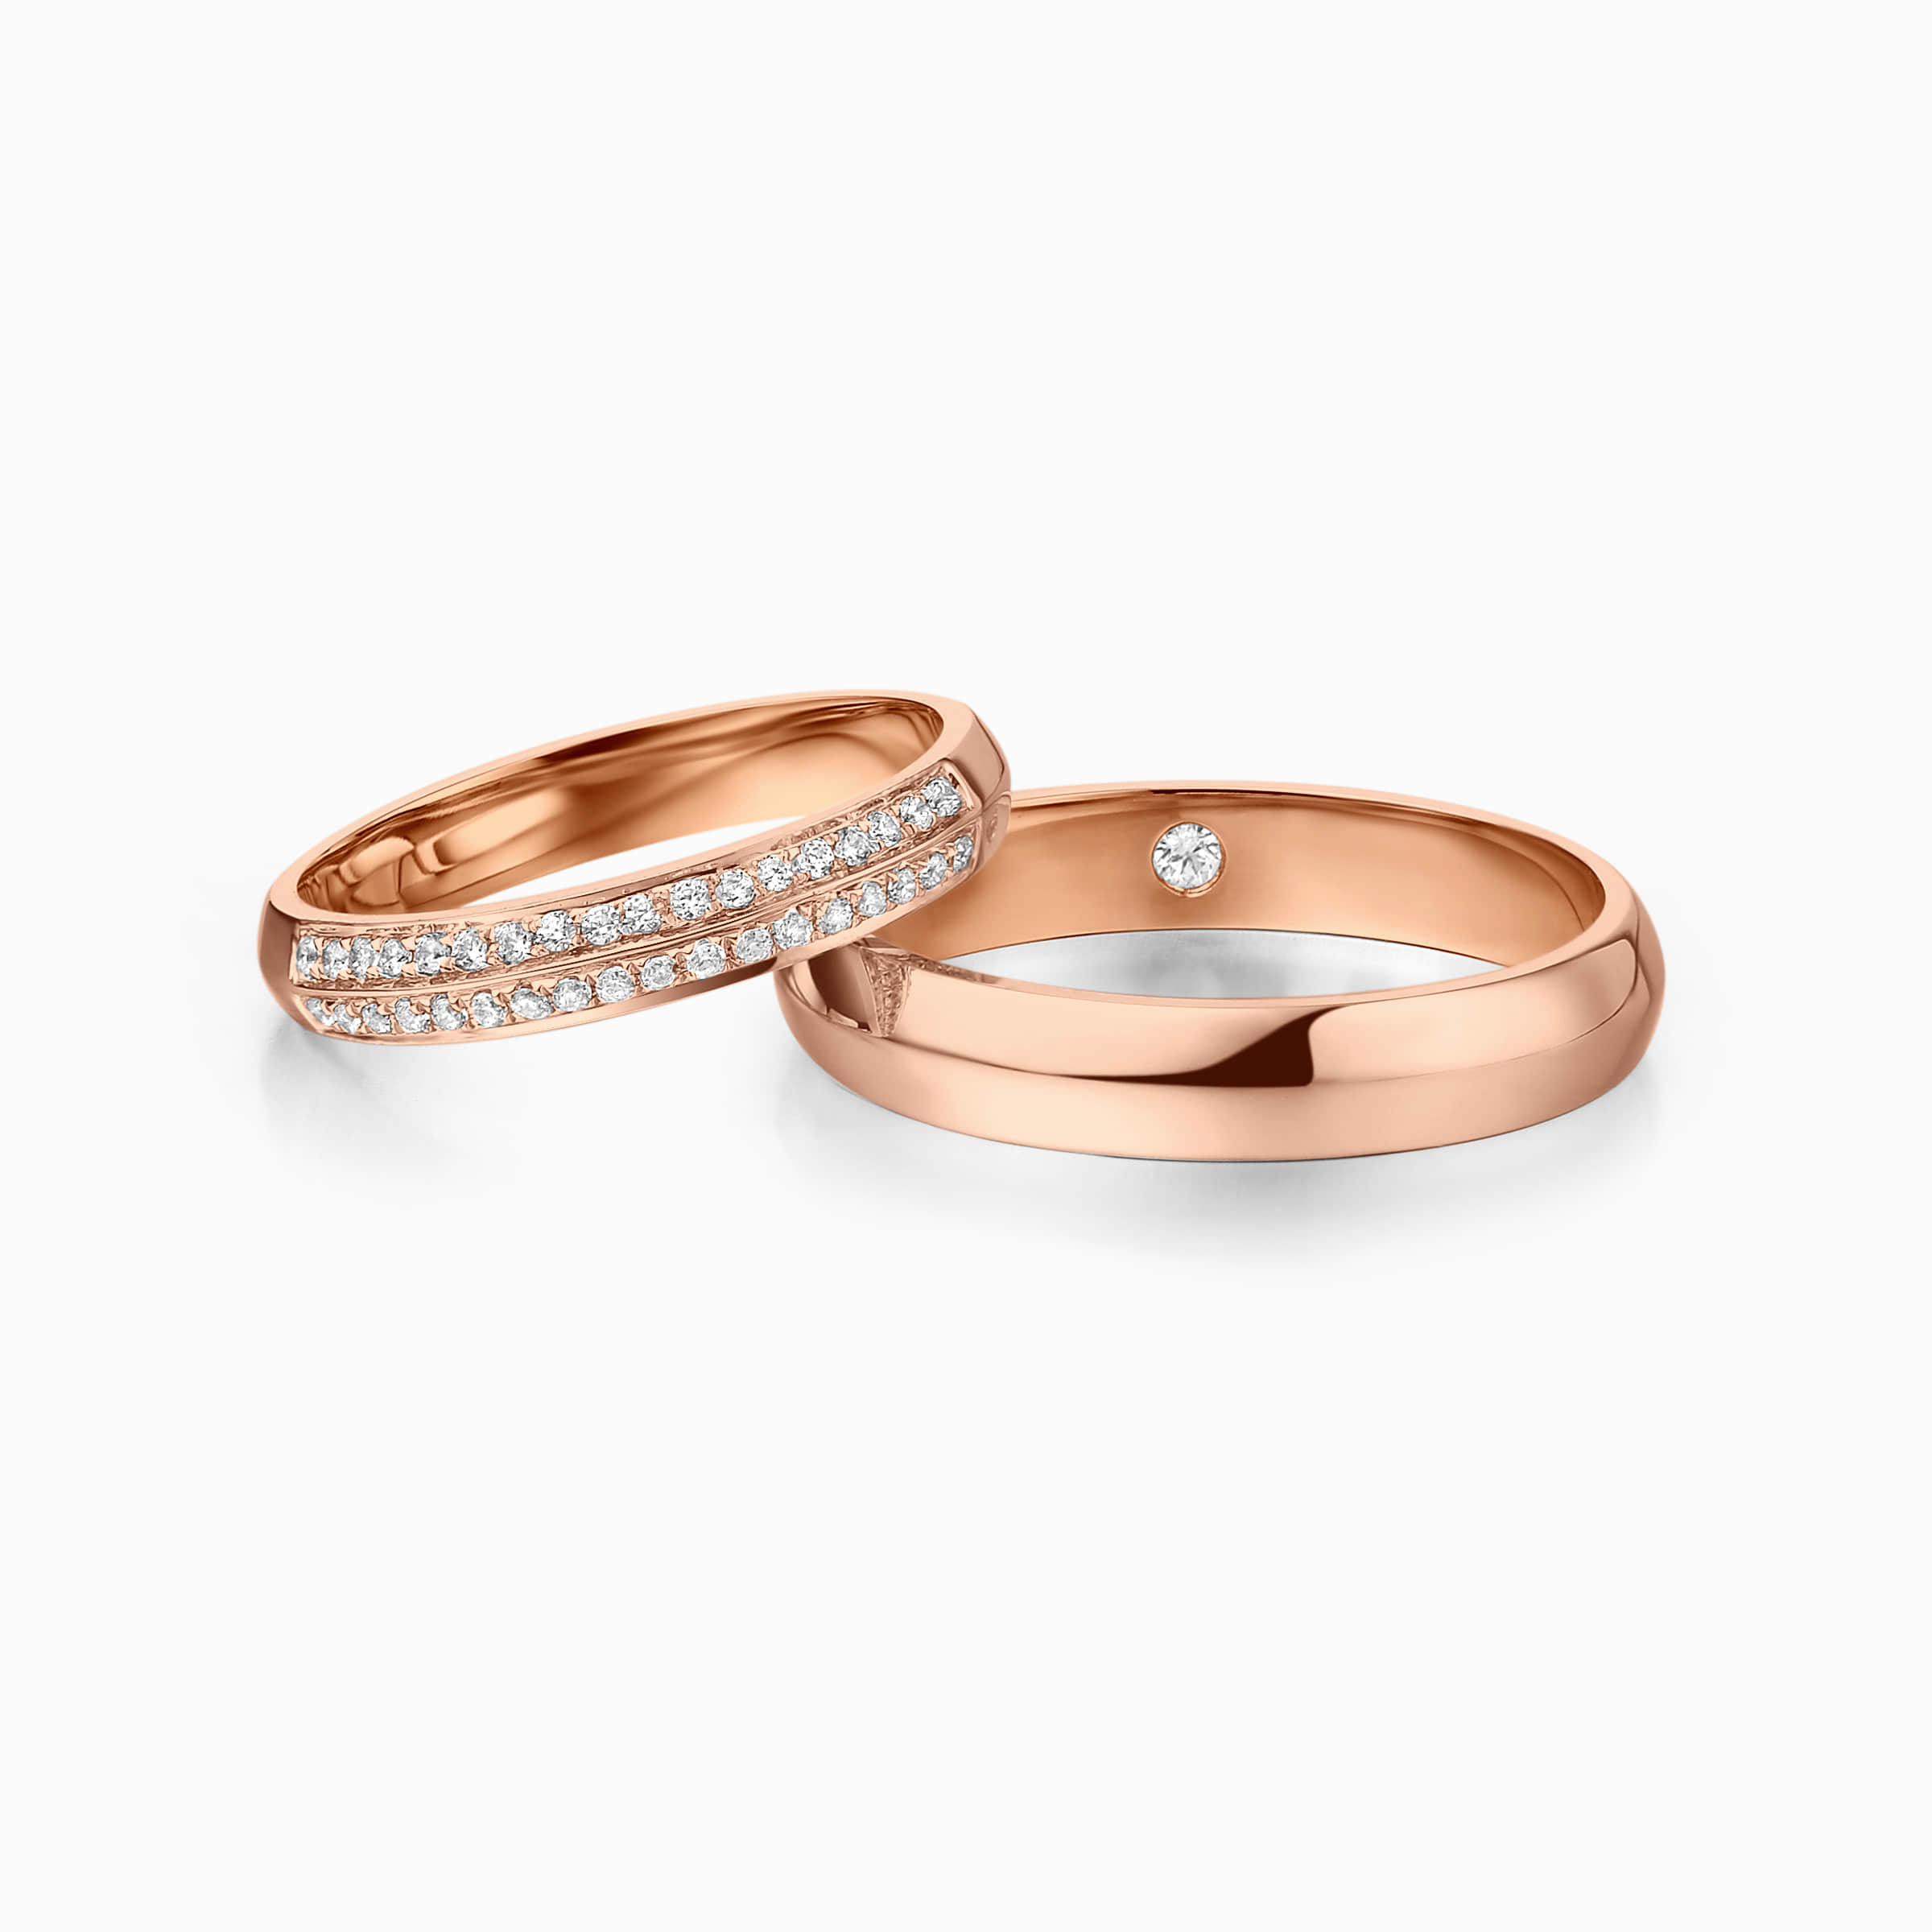 Darry Ring double row wedding bands in rose gold